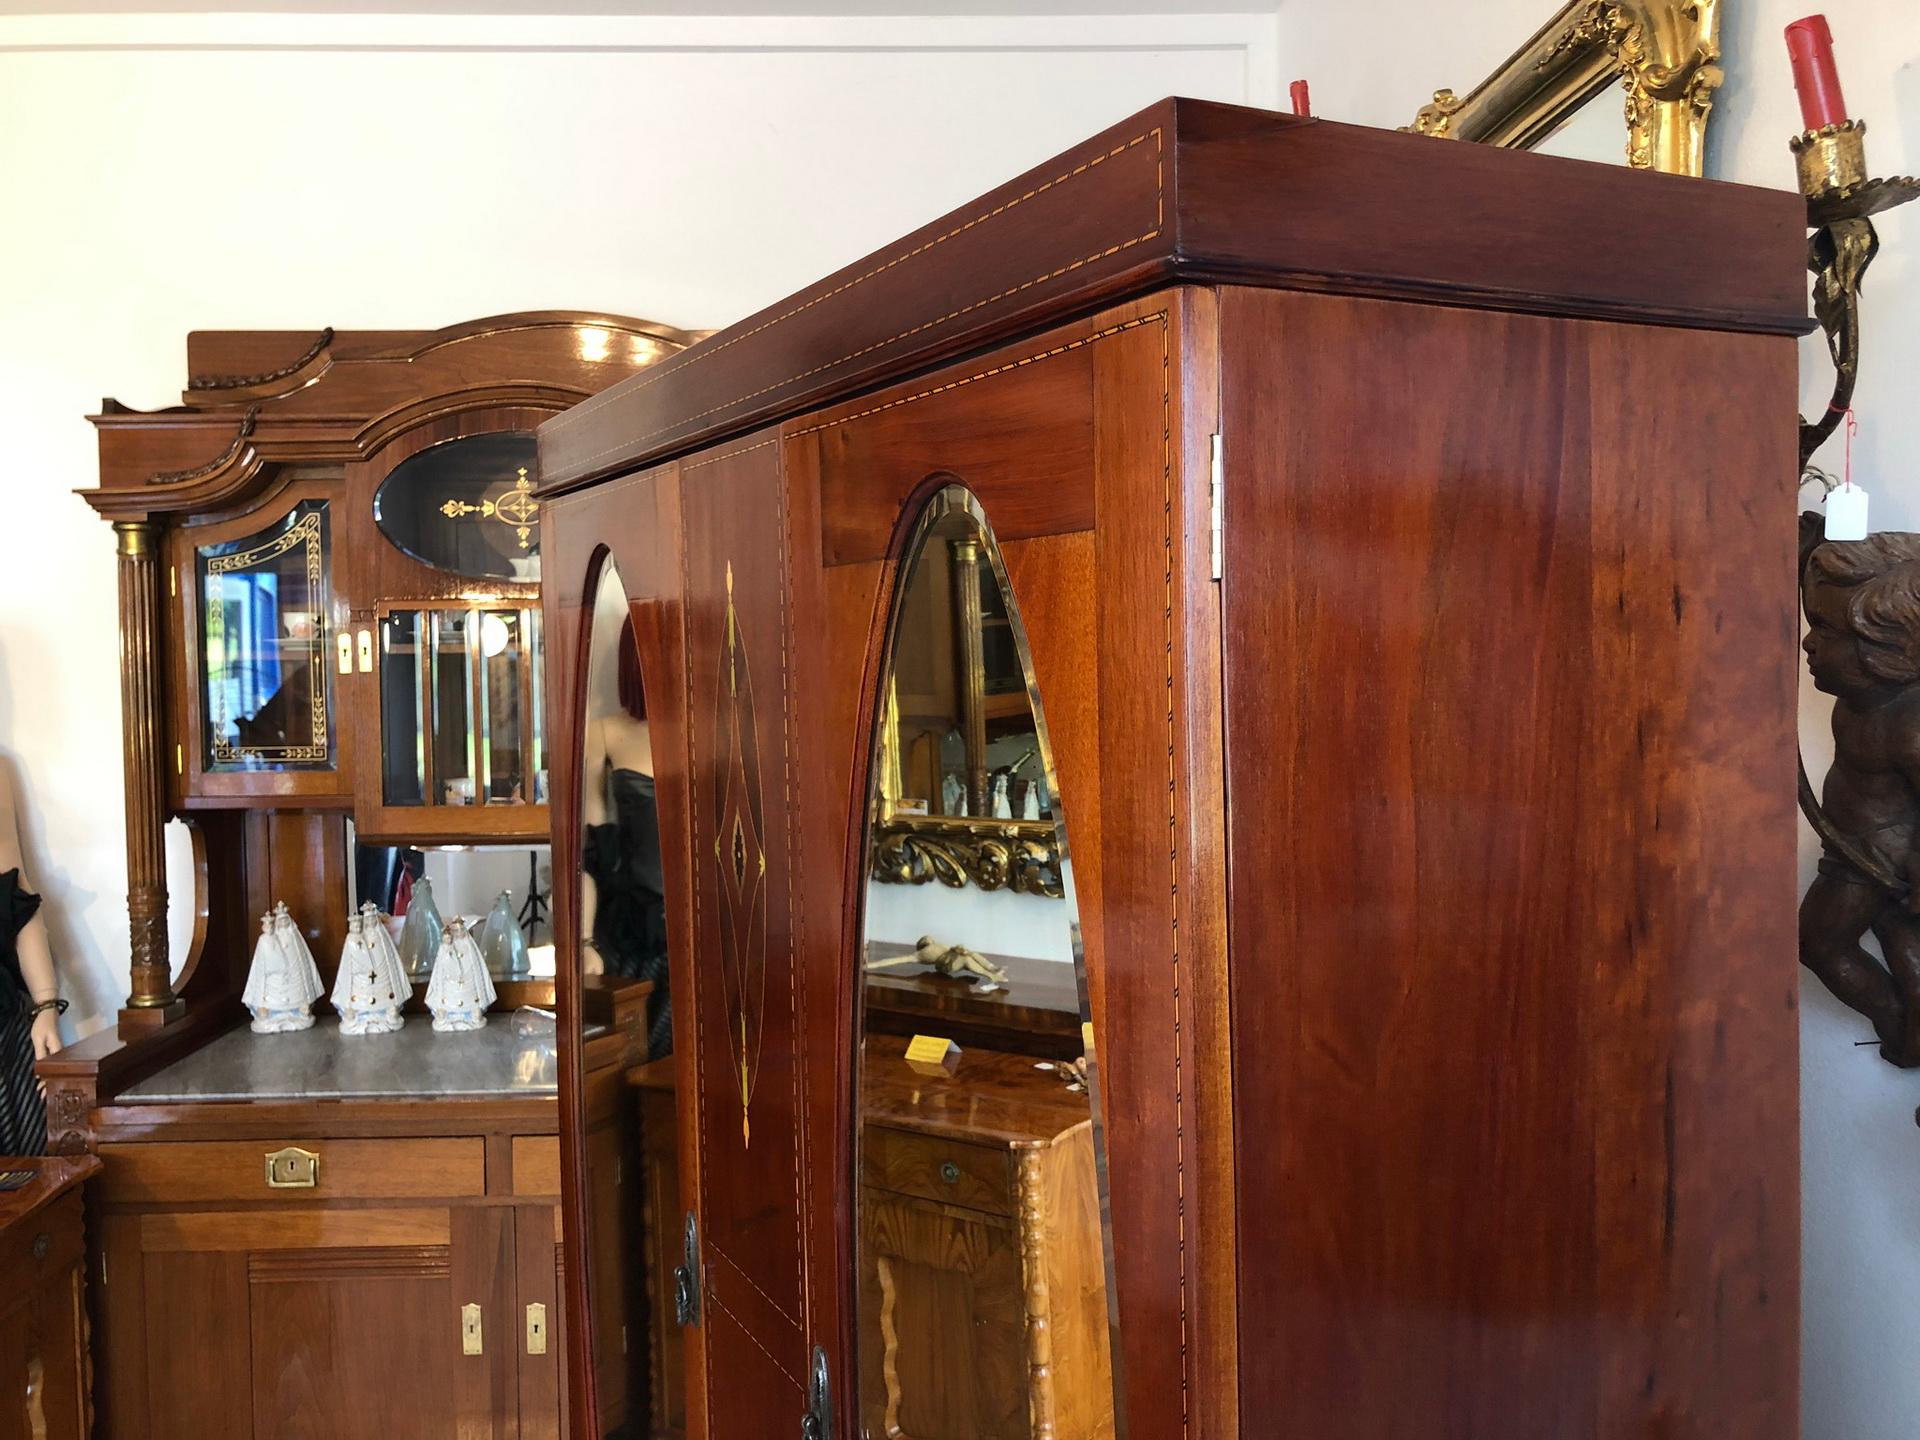 Early 20th Century Vienna Secession Jugendstil Cabinet Wardrobe, circa 1900 For Sale